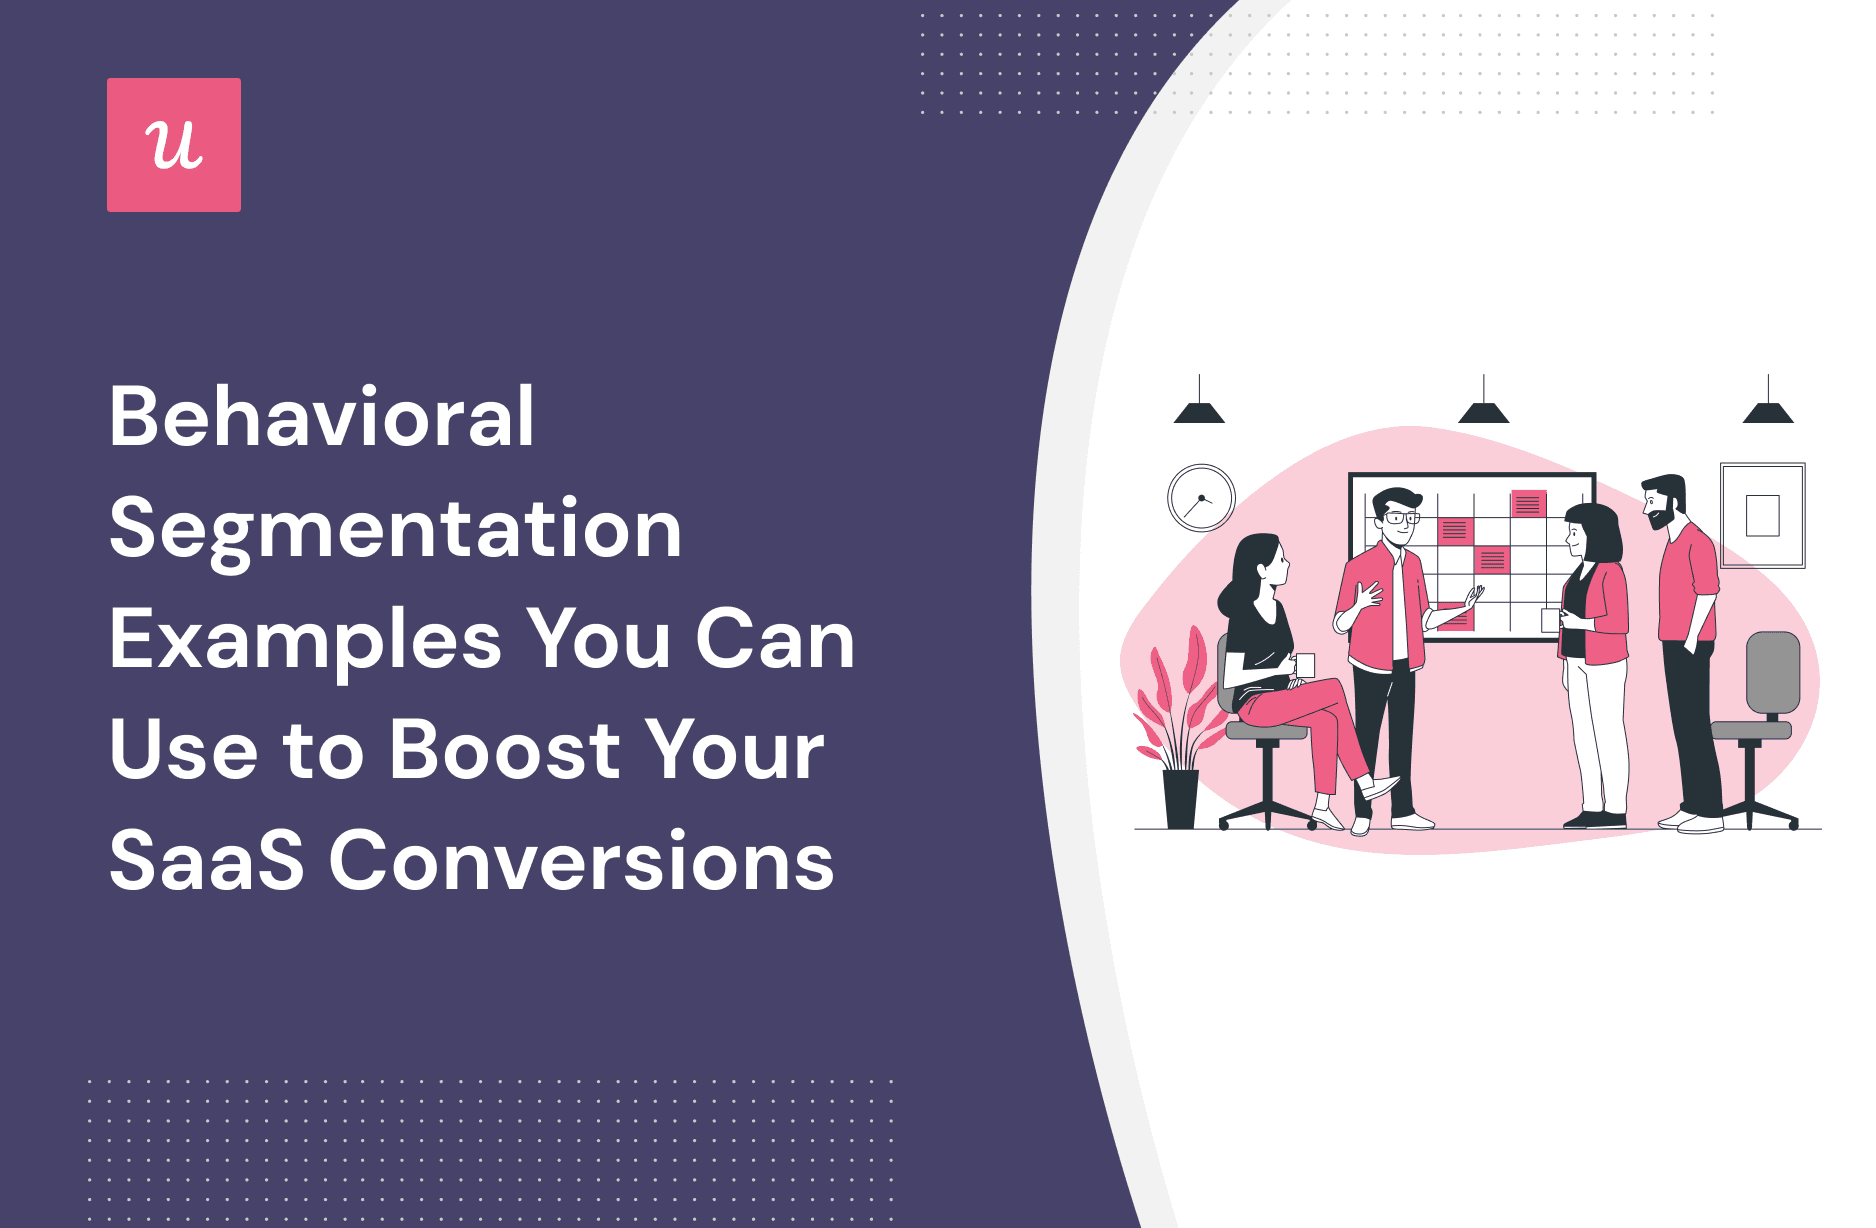 Behavioral-Segmentation-Examples-You-Can-Use-to-Boost-Your-SaaS-Conversions